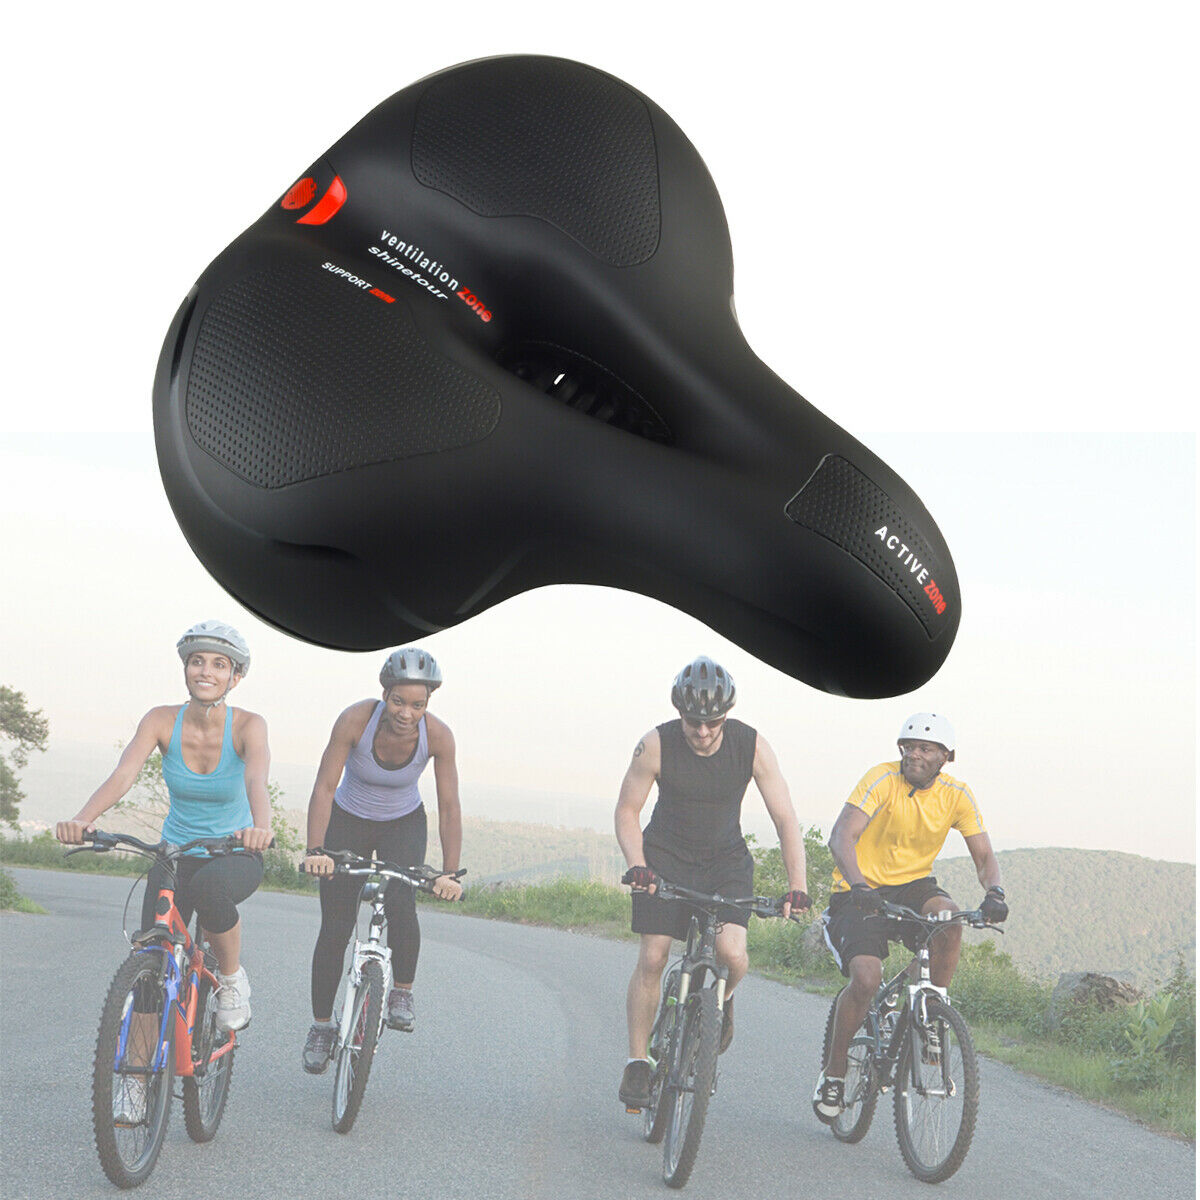 Thicken Comfortable Bike Bicycle Universal for off-road Padded Bicycle Saddle